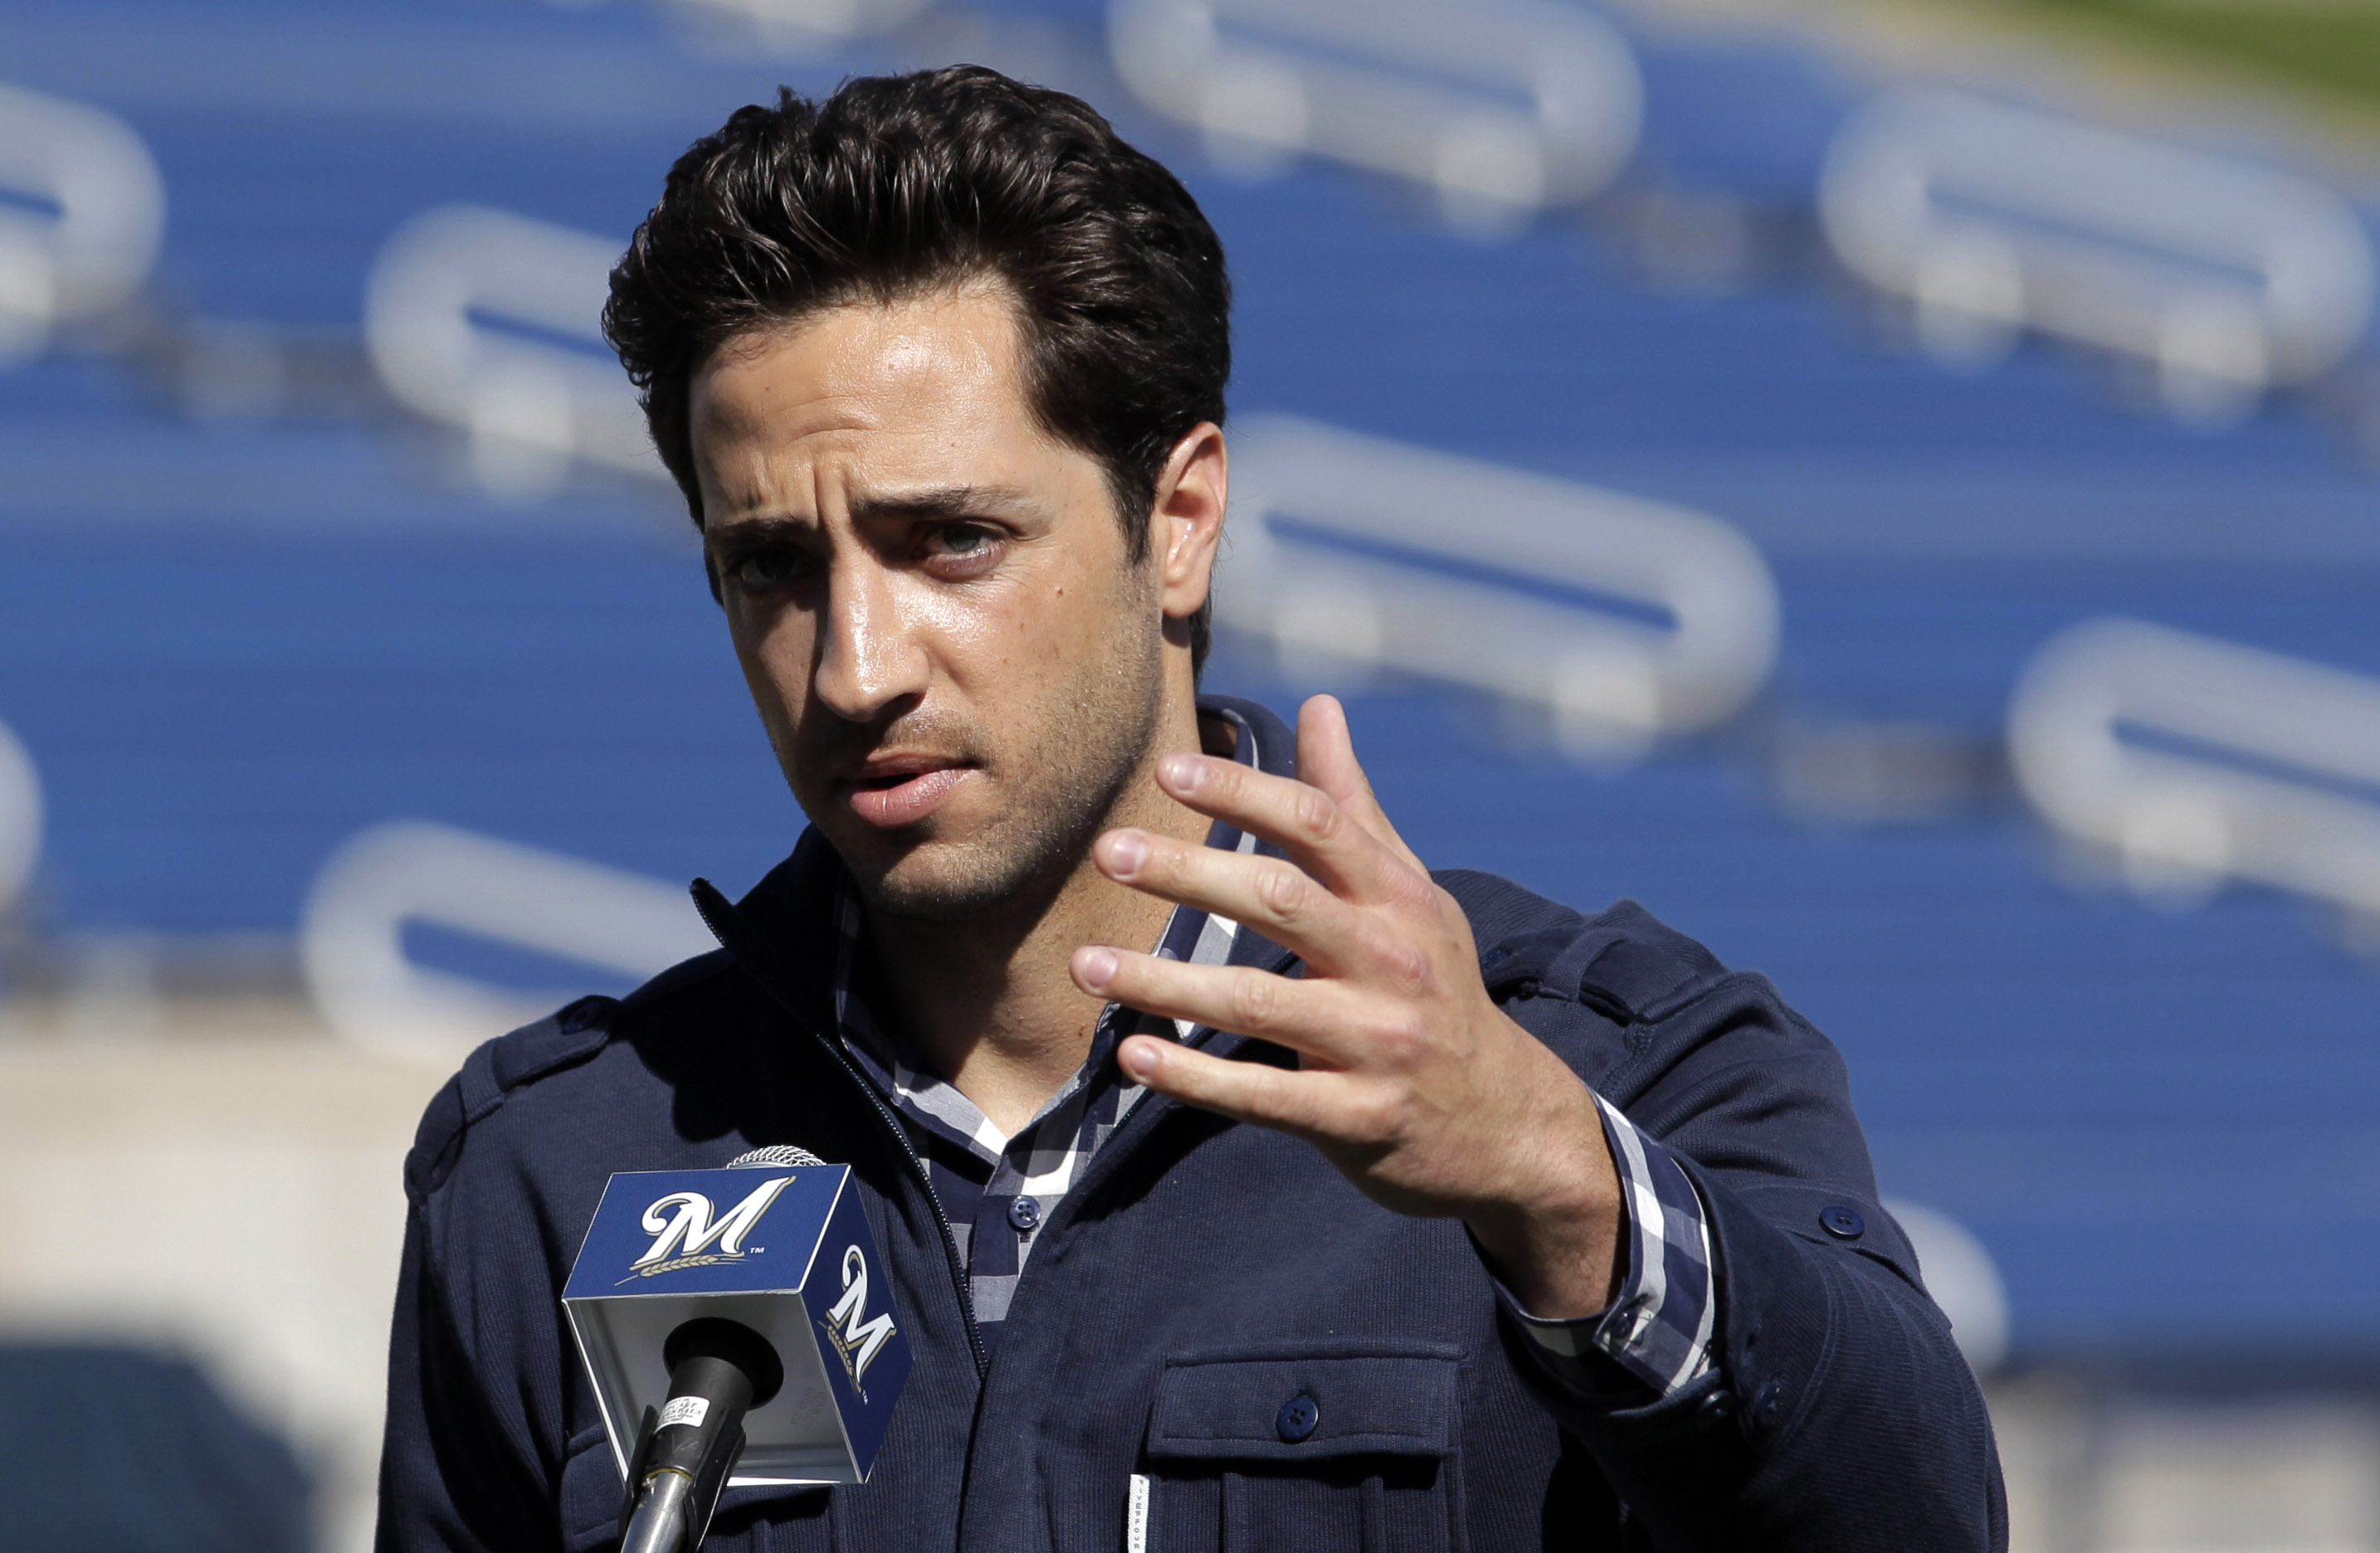 Brewers' Ryan Braun, former MVP, suspended from MLB for drugs - CBS News